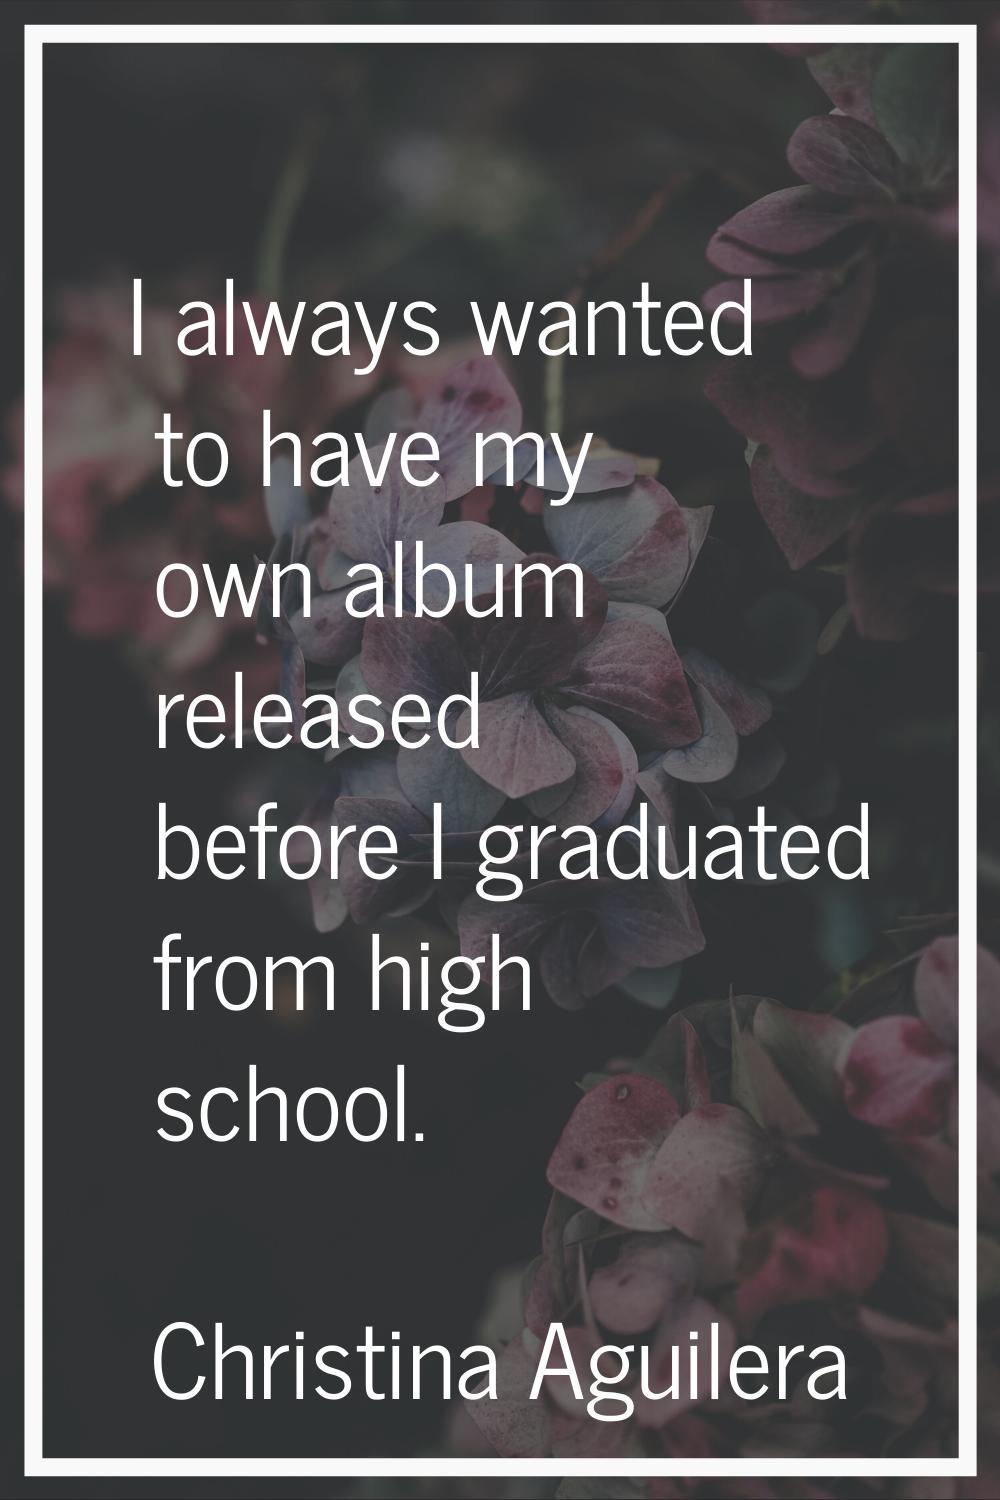 I always wanted to have my own album released before I graduated from high school.